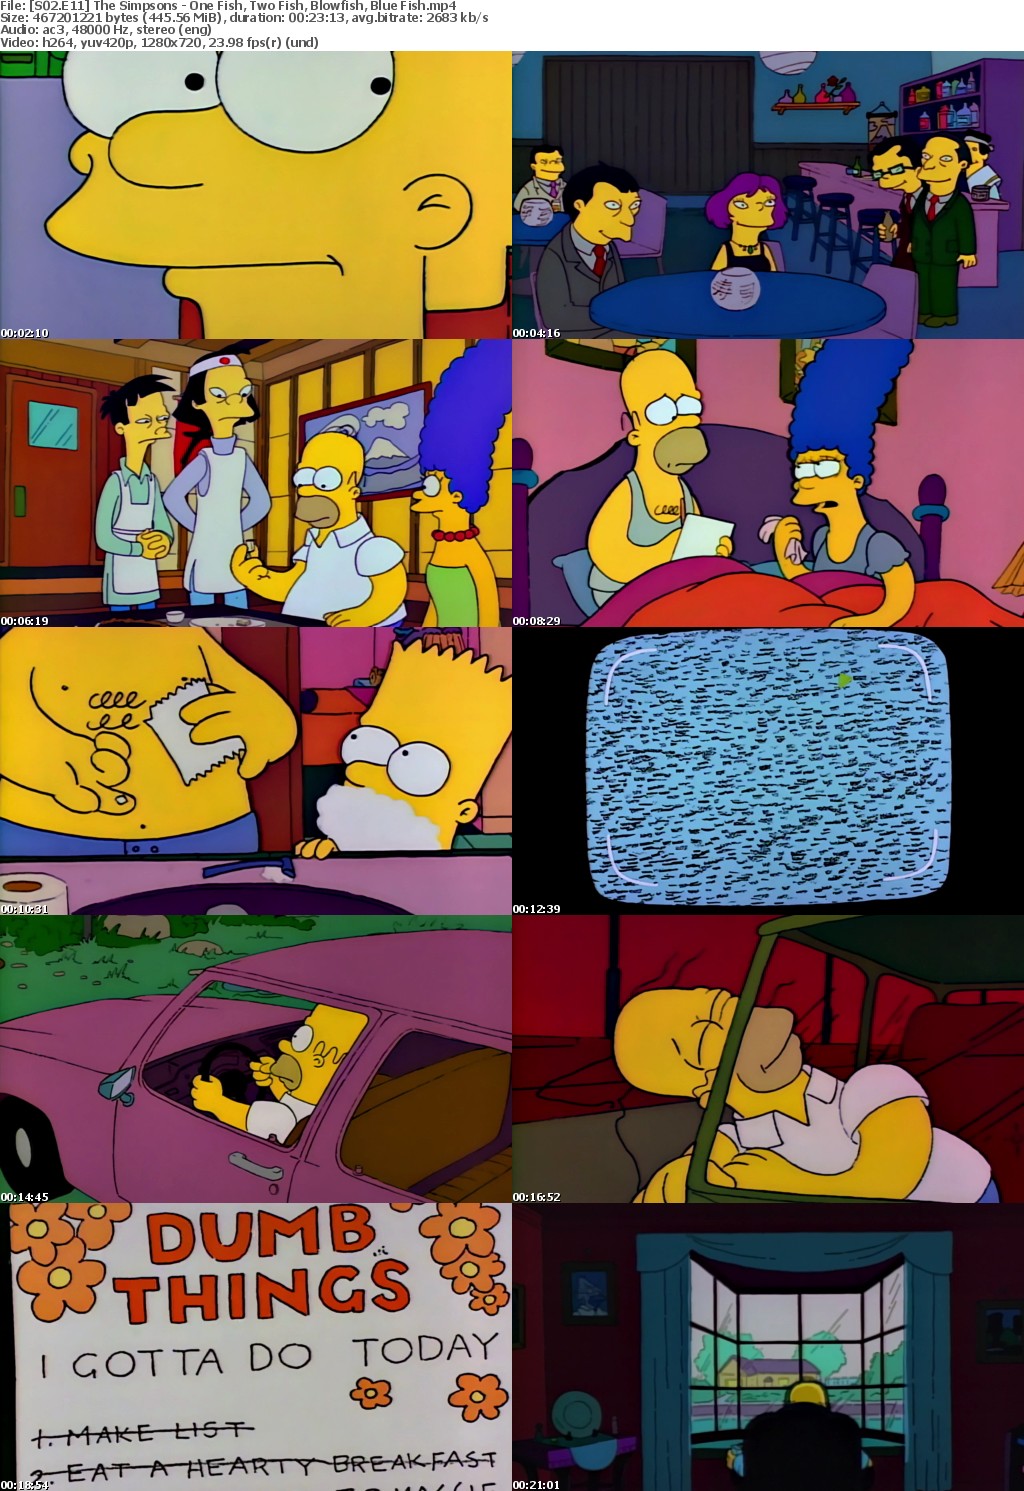 The Simpsons S2 E11 One Fish Two Fish Blowfish Bluefish MP4 720p H264 WEBRip EzzRips